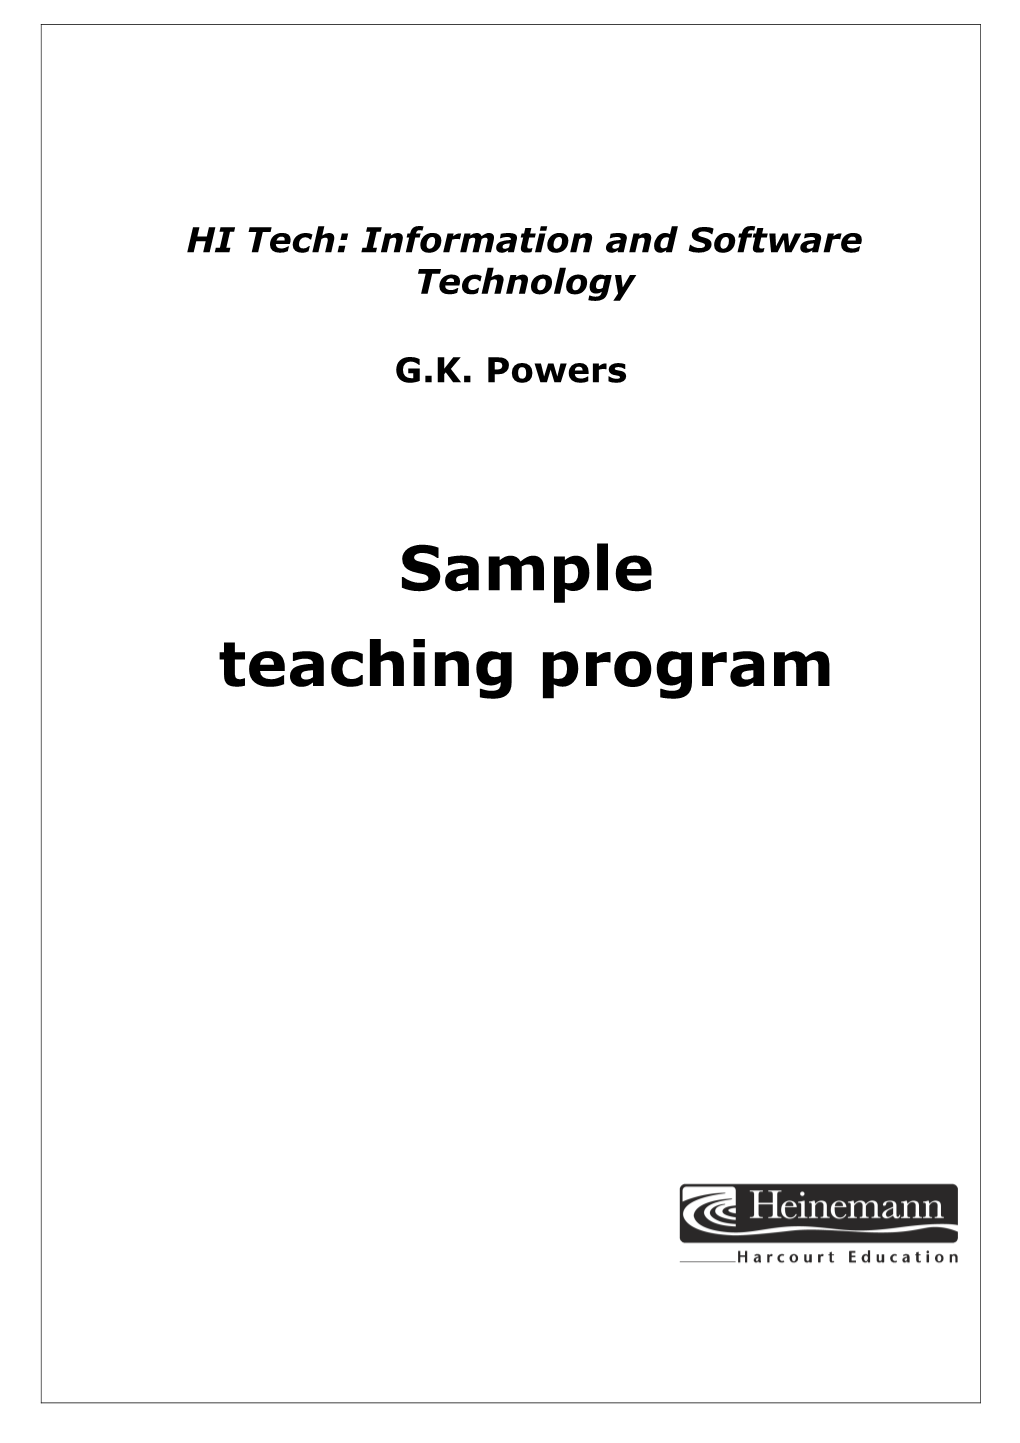 HI Tech: Information and Software Technology